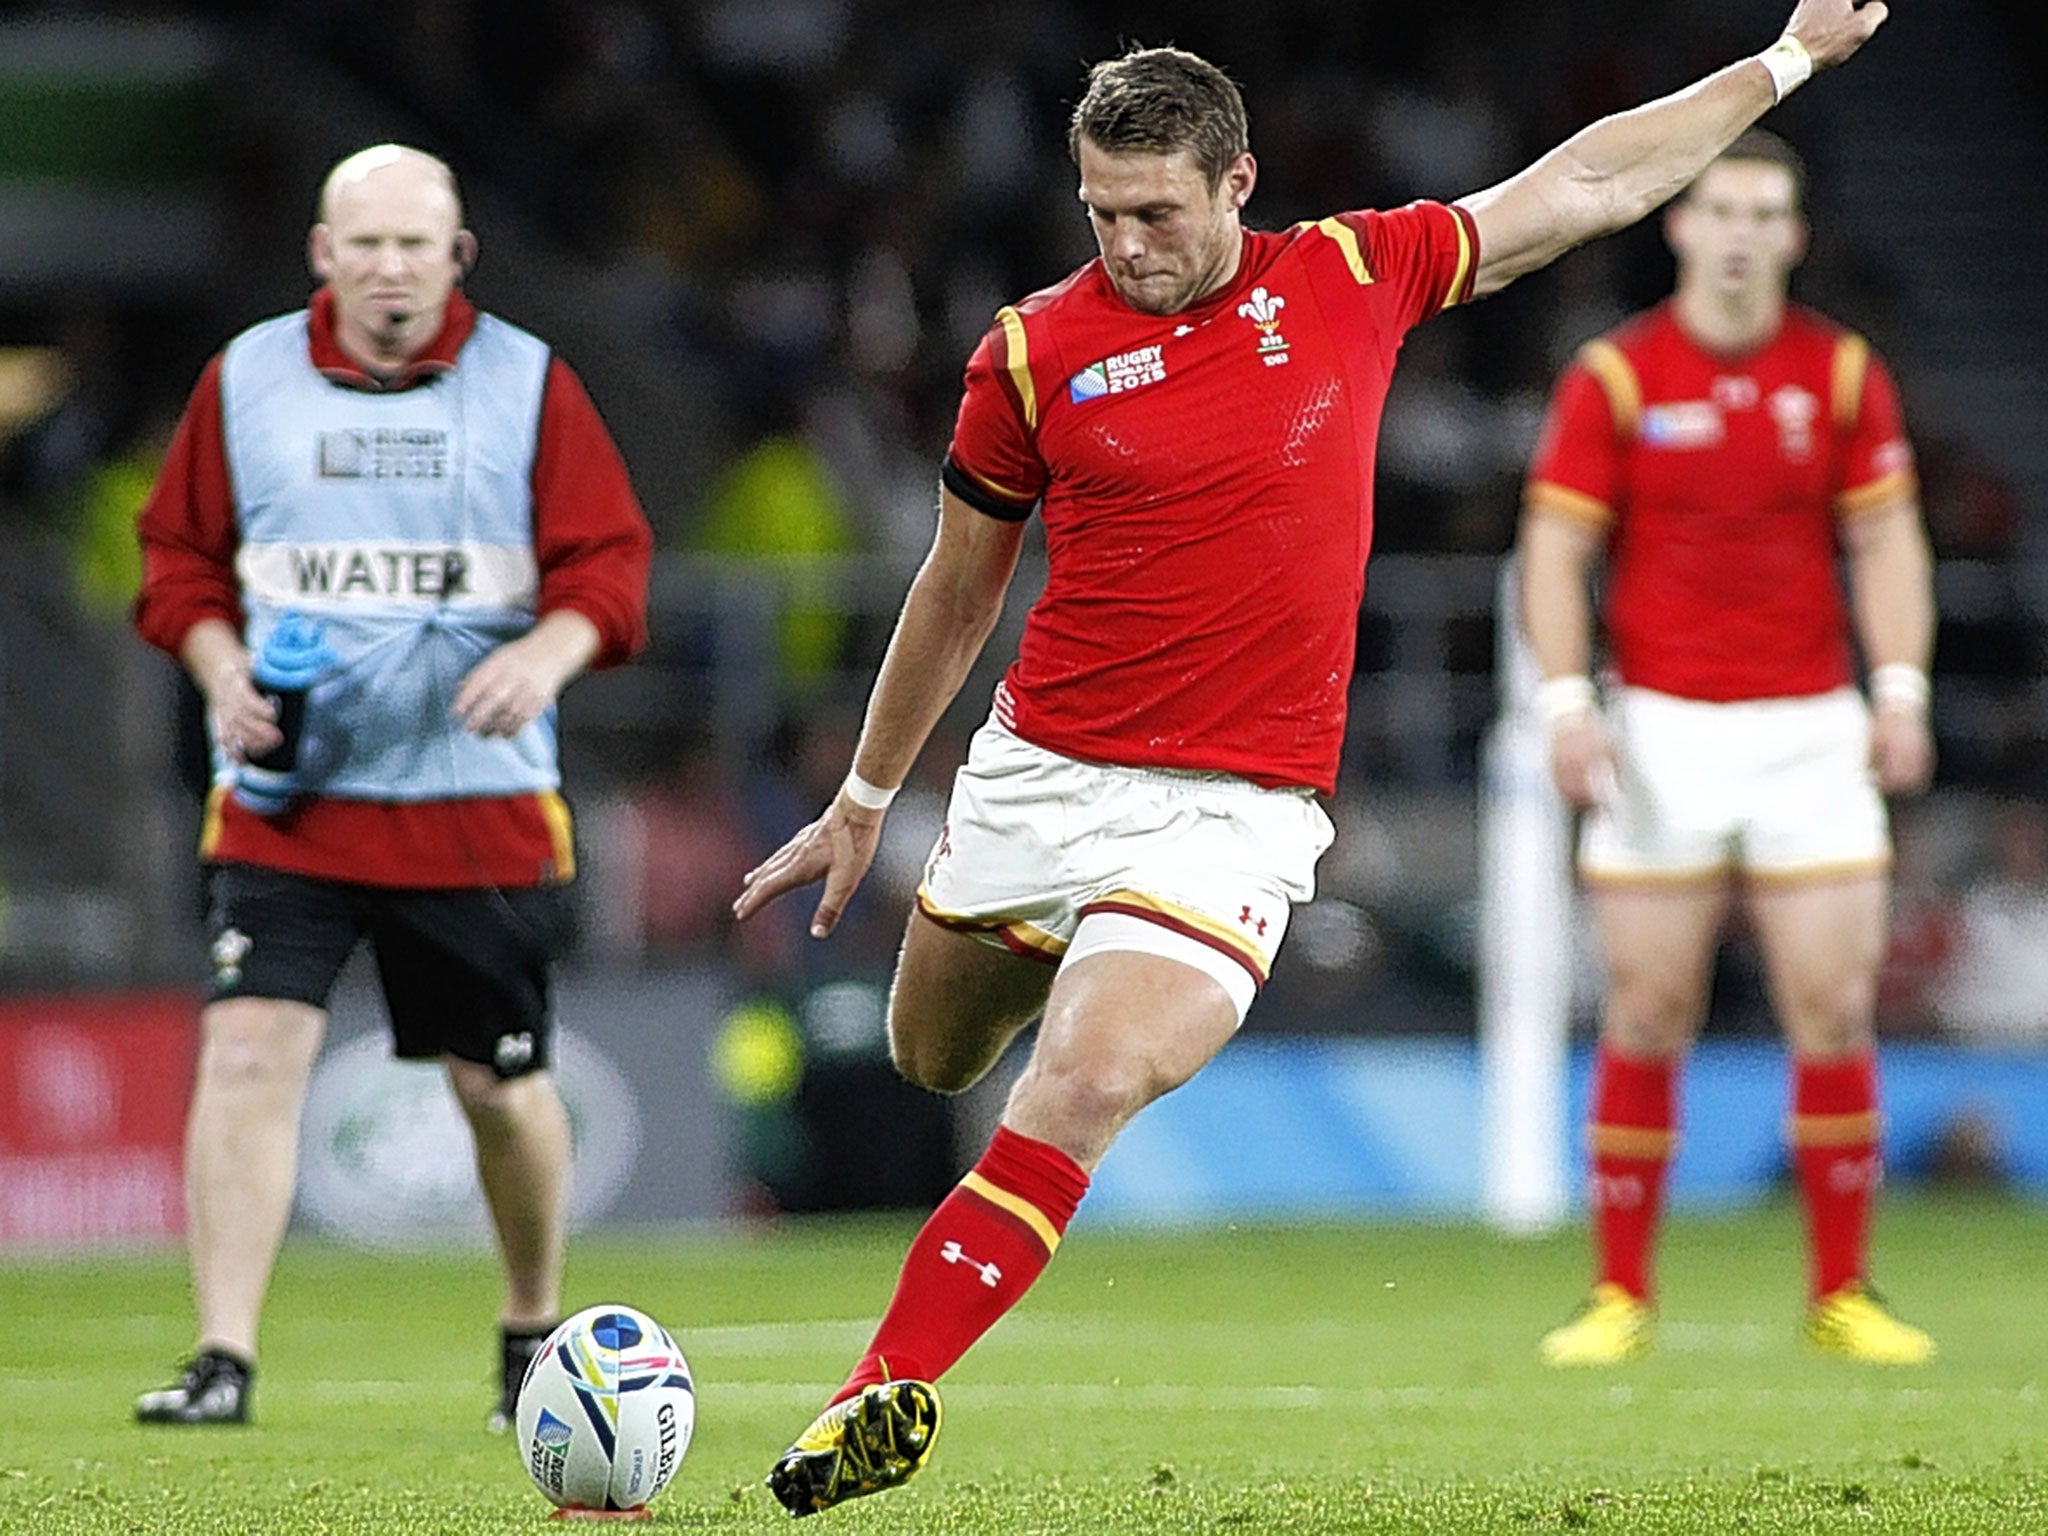 Dan BIggar kicks a penalty for Wales after yet another error by England